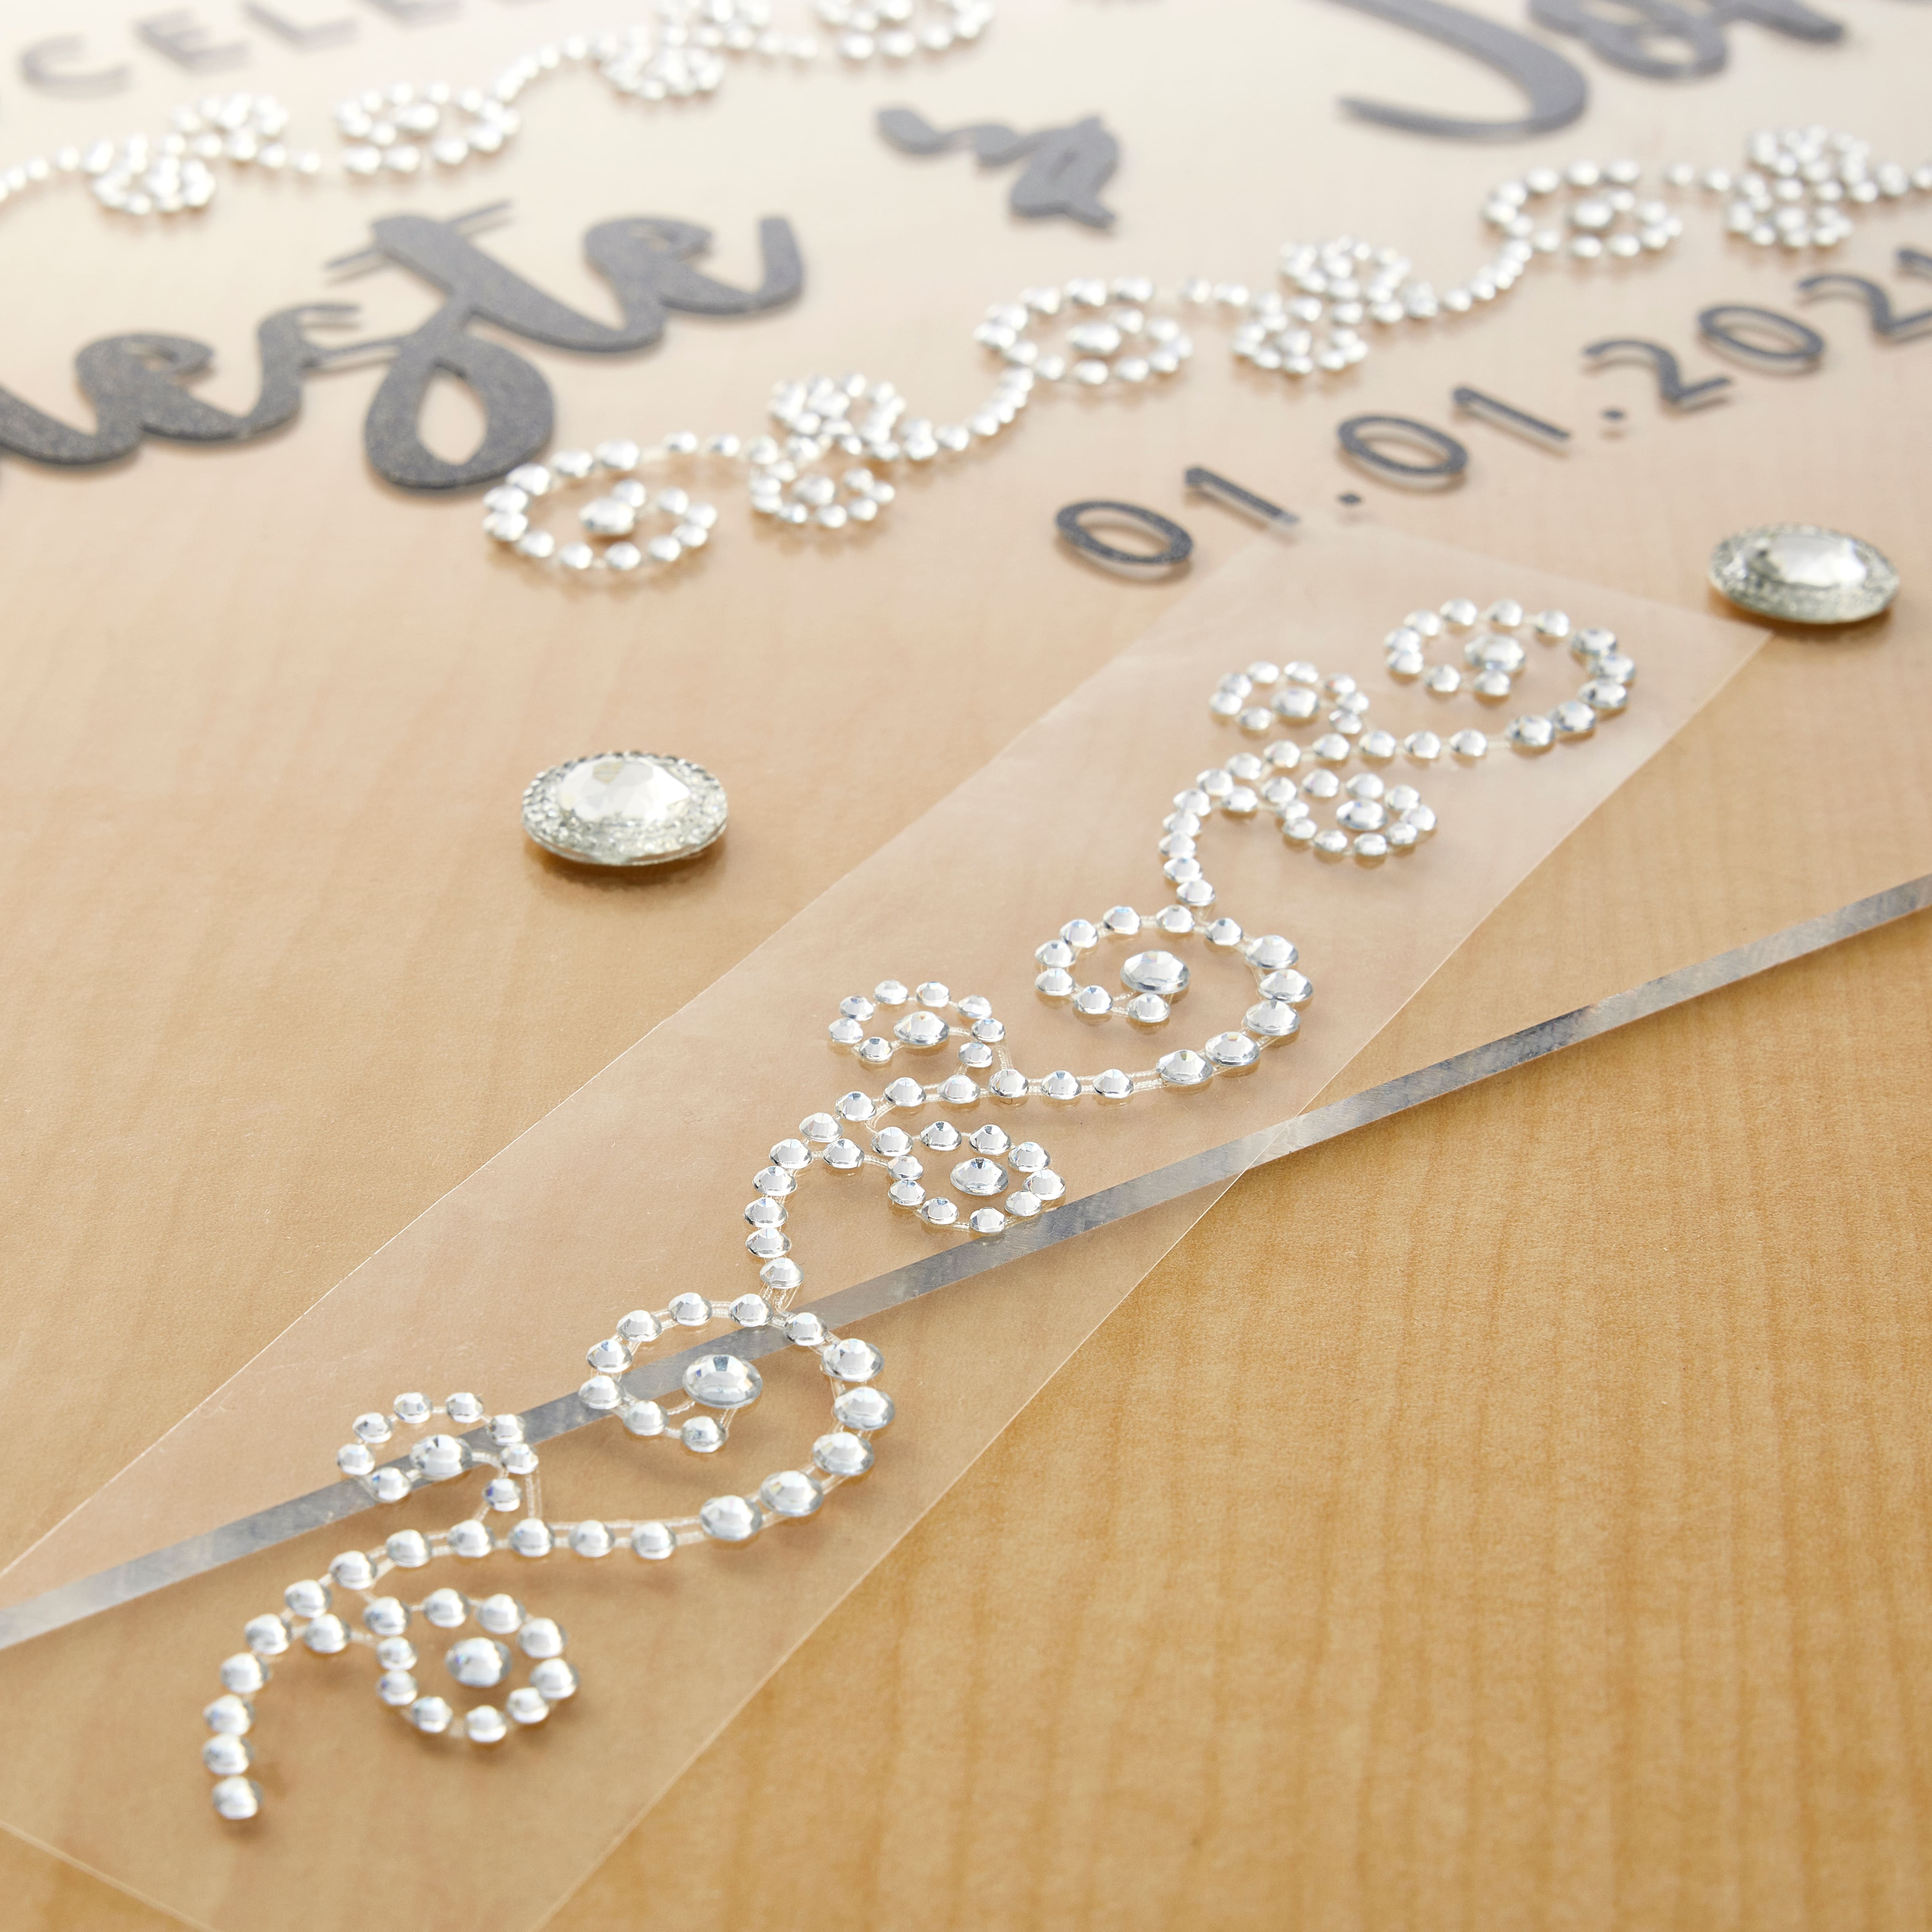 Recollections™ Adhesive Rhinestones, Curved Clear Flourishes